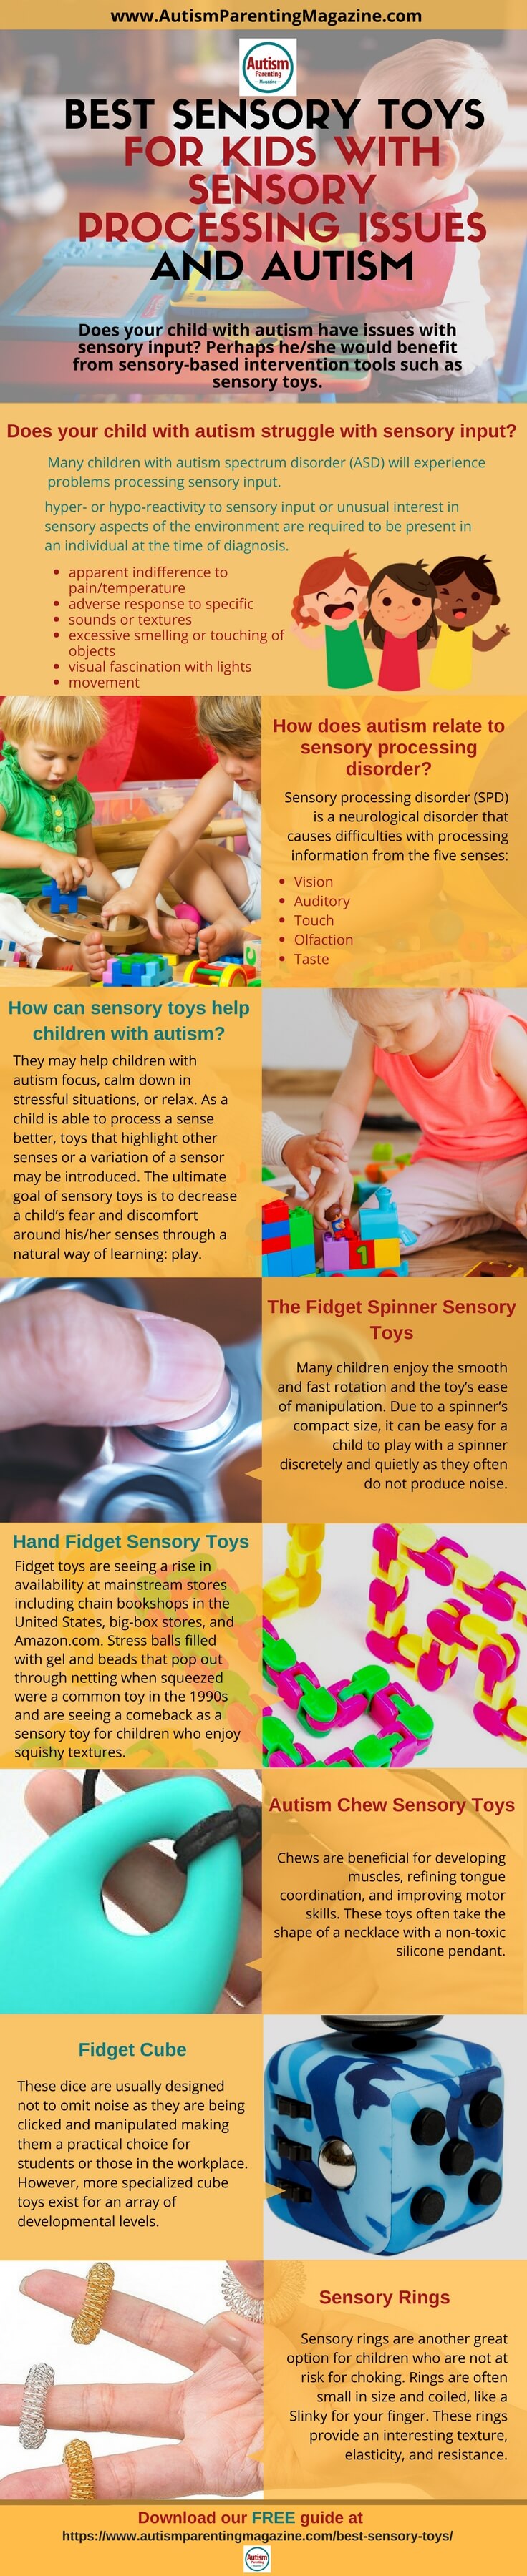 Best Sensory Toys for Kids with Sensory Processing Issues and Autism [INFOGRAPHIC]